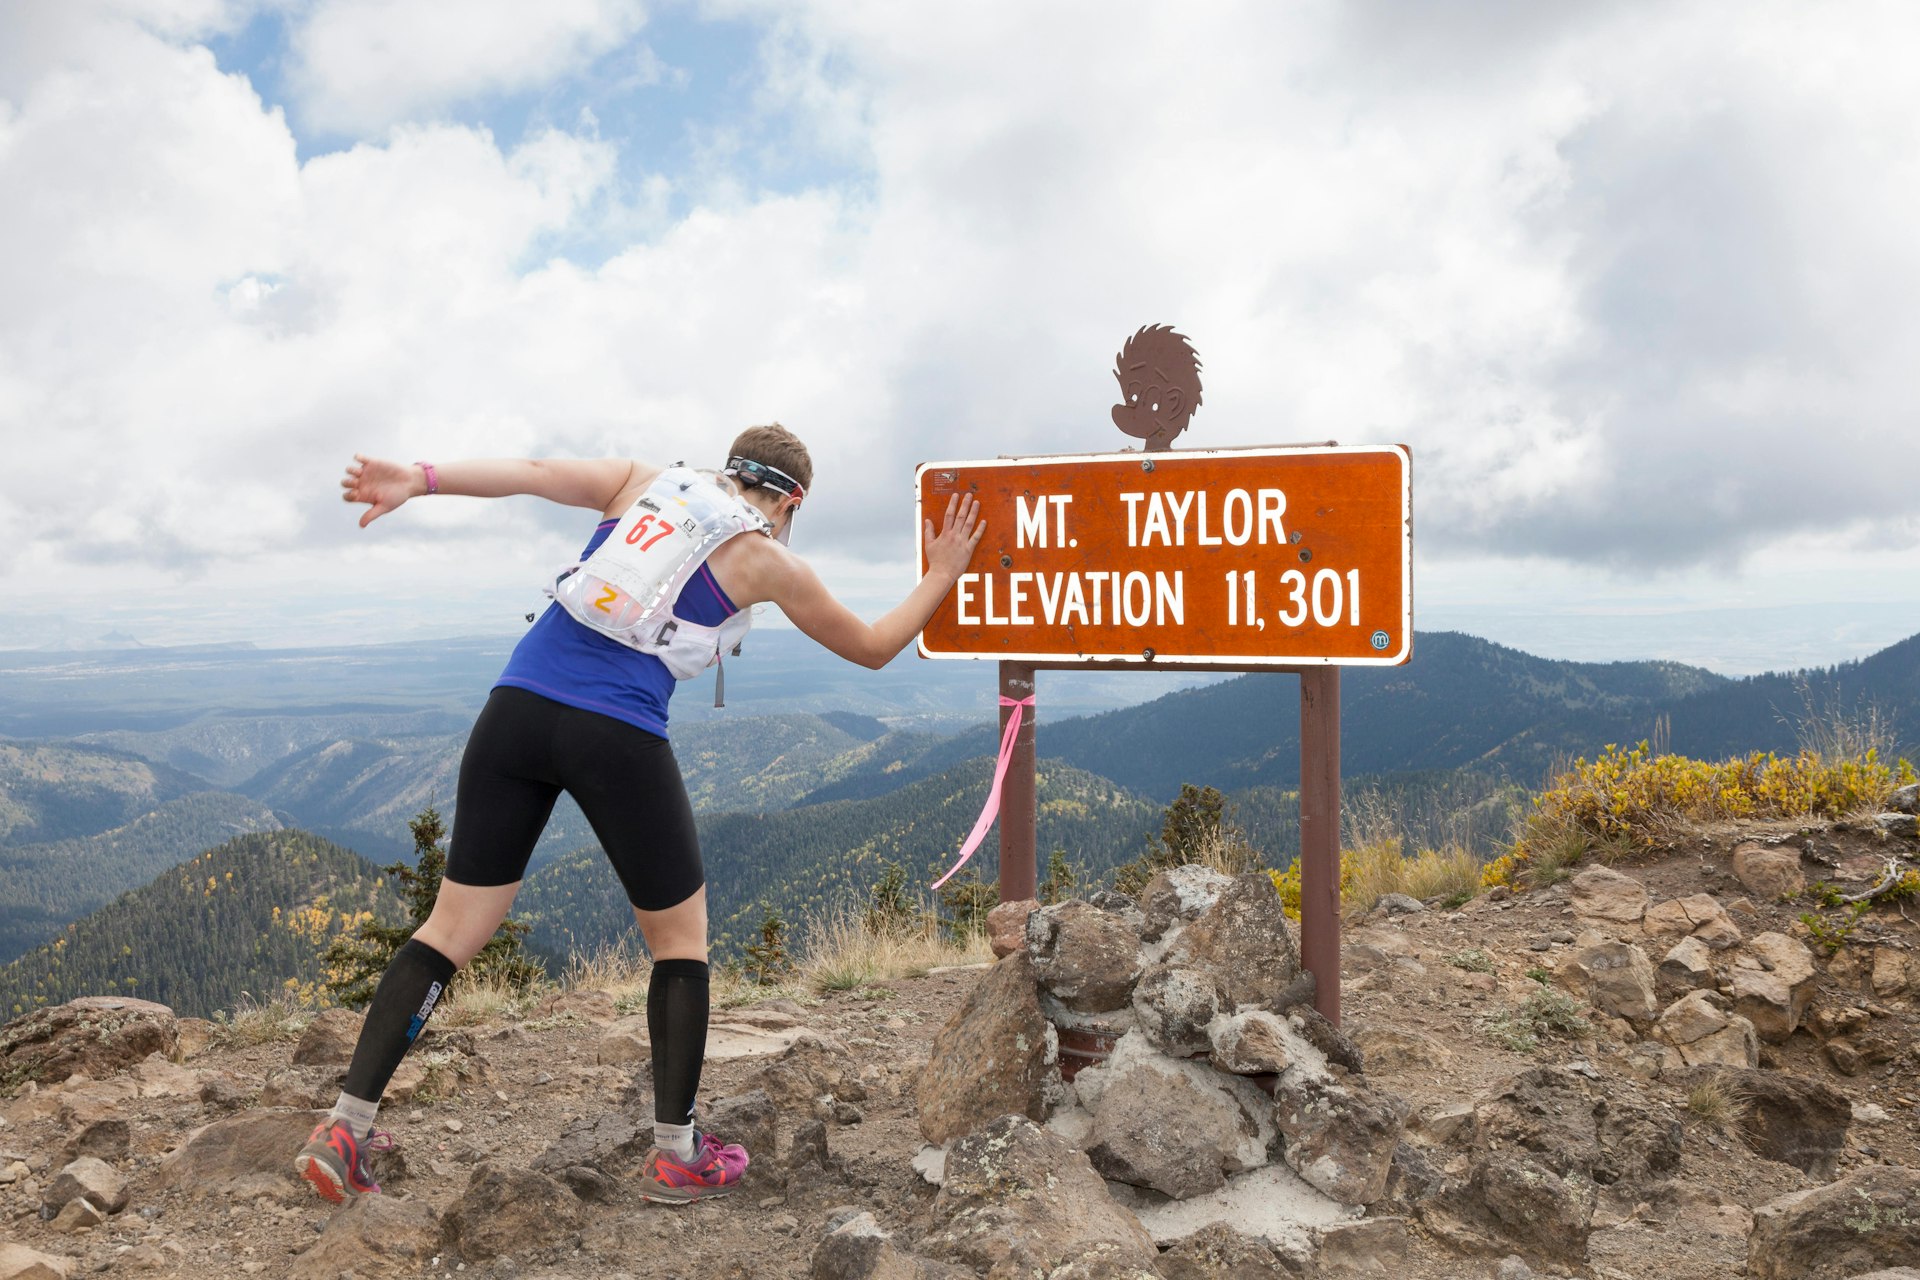 Runner reaches the summit during the Mt Taylor 50k - Mt Taylor, San Mateo Mountains, Cibola National Forest, New Mexico, USA